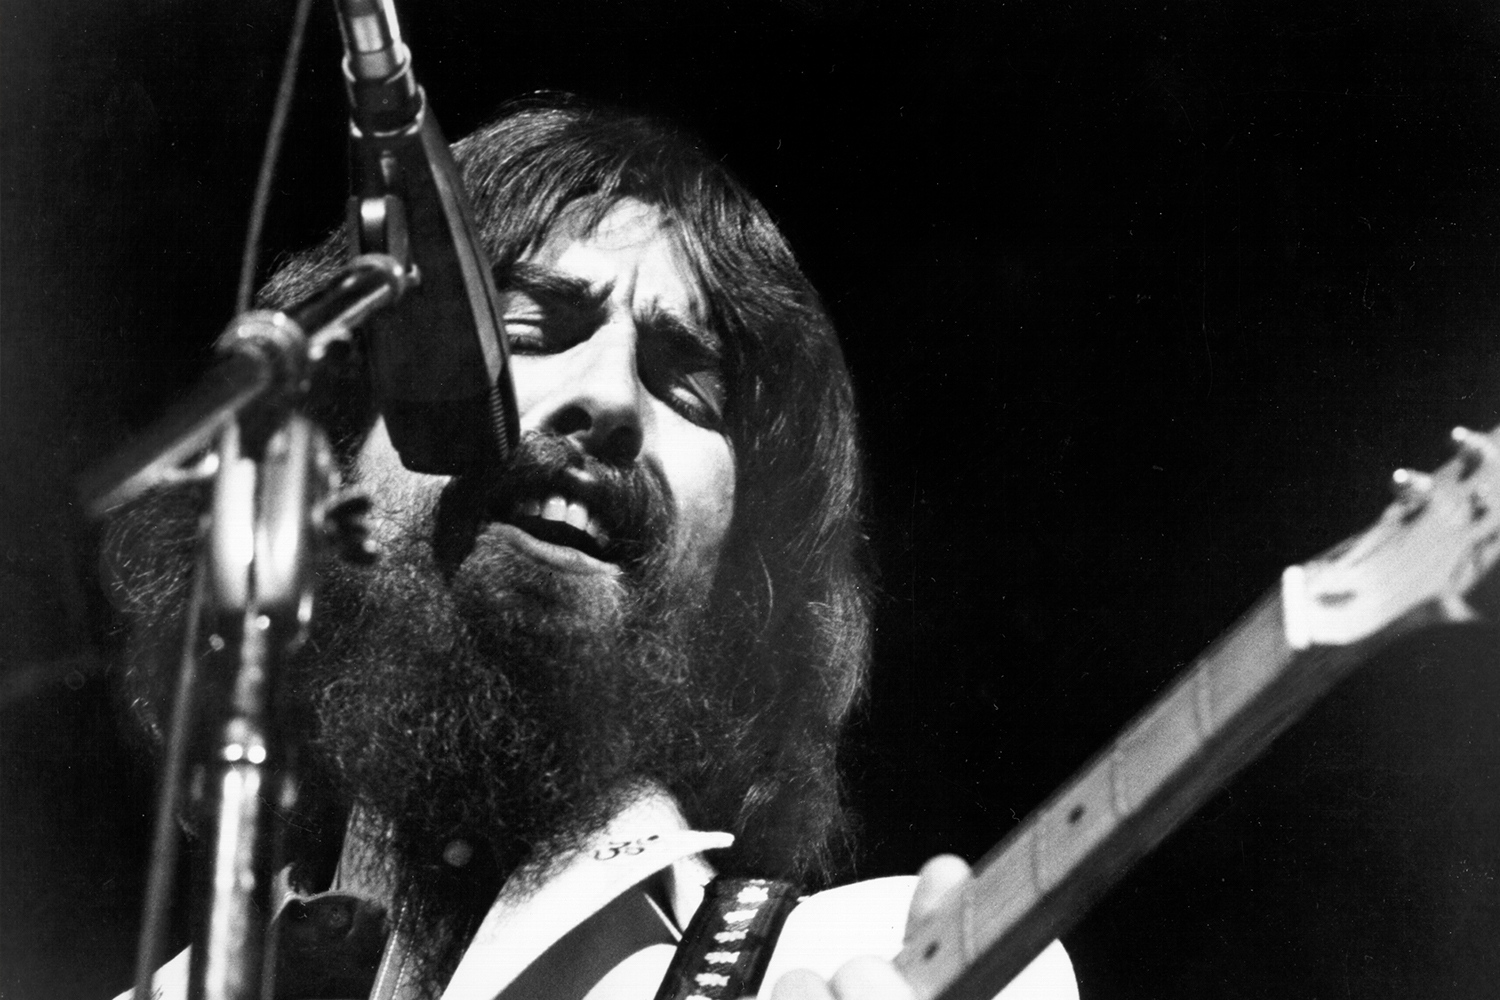 George Harrison performs onstage at the Concert for Bangladesh which was held at Madison Square Garden on August 1, 1971 in New York City